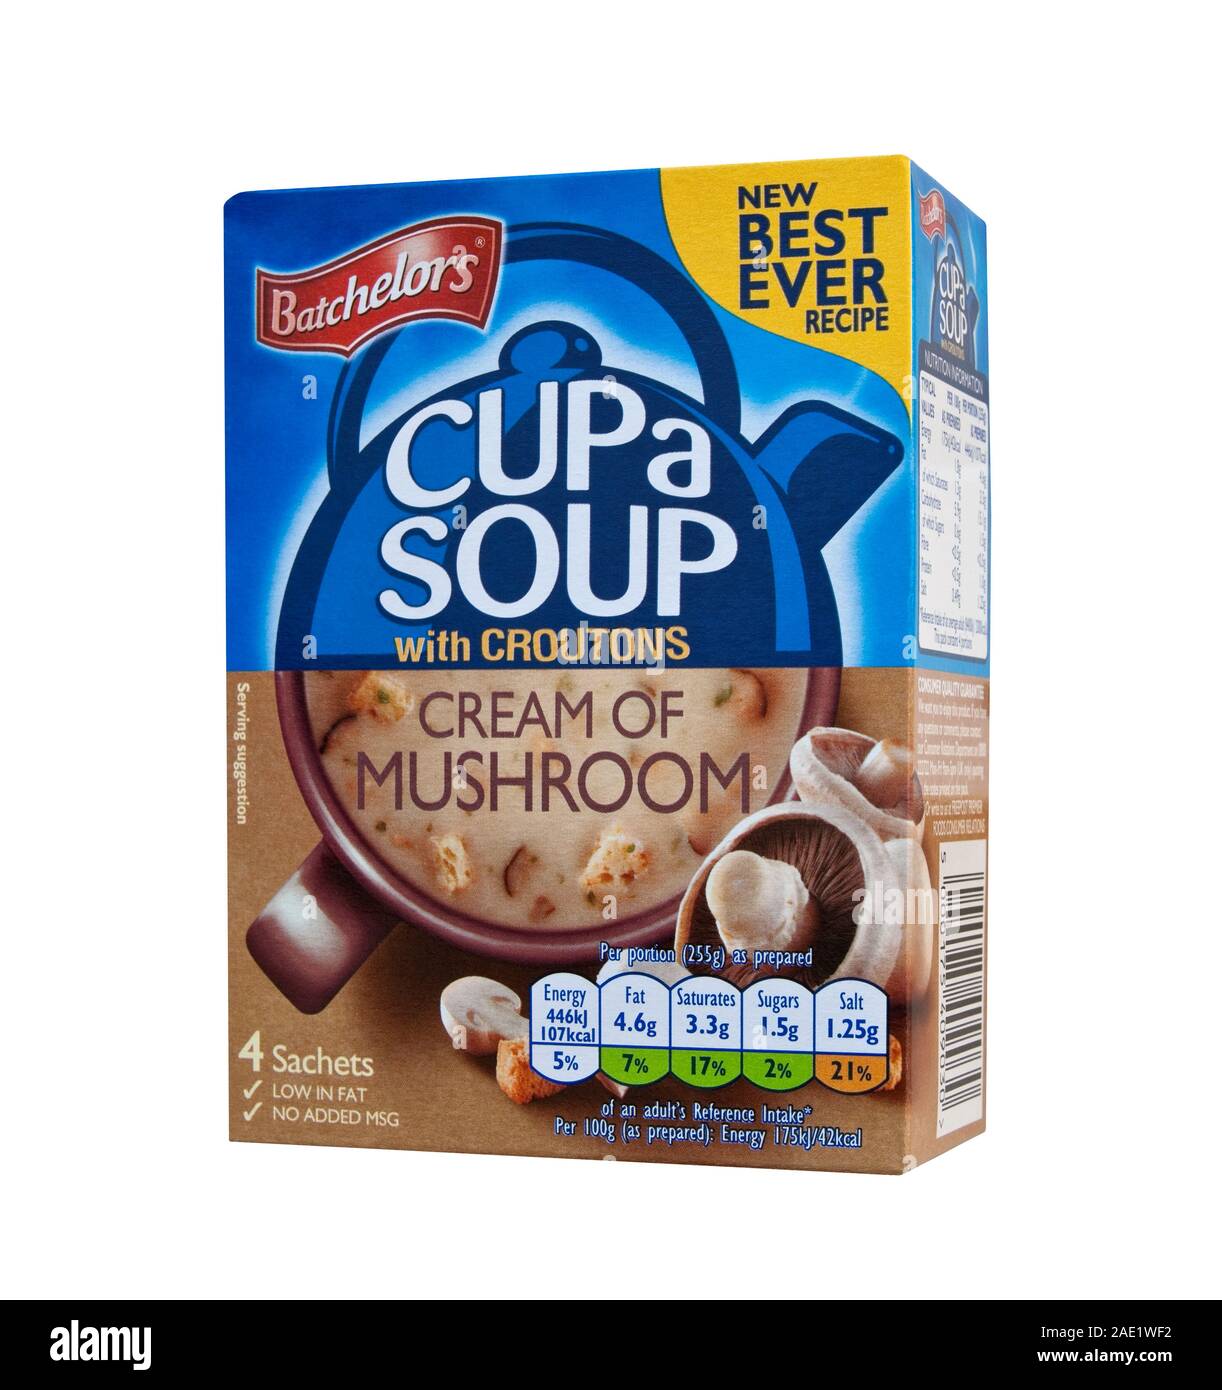 Batchelors cream of mushroom cup a soup with croutons packet box Stock Photo